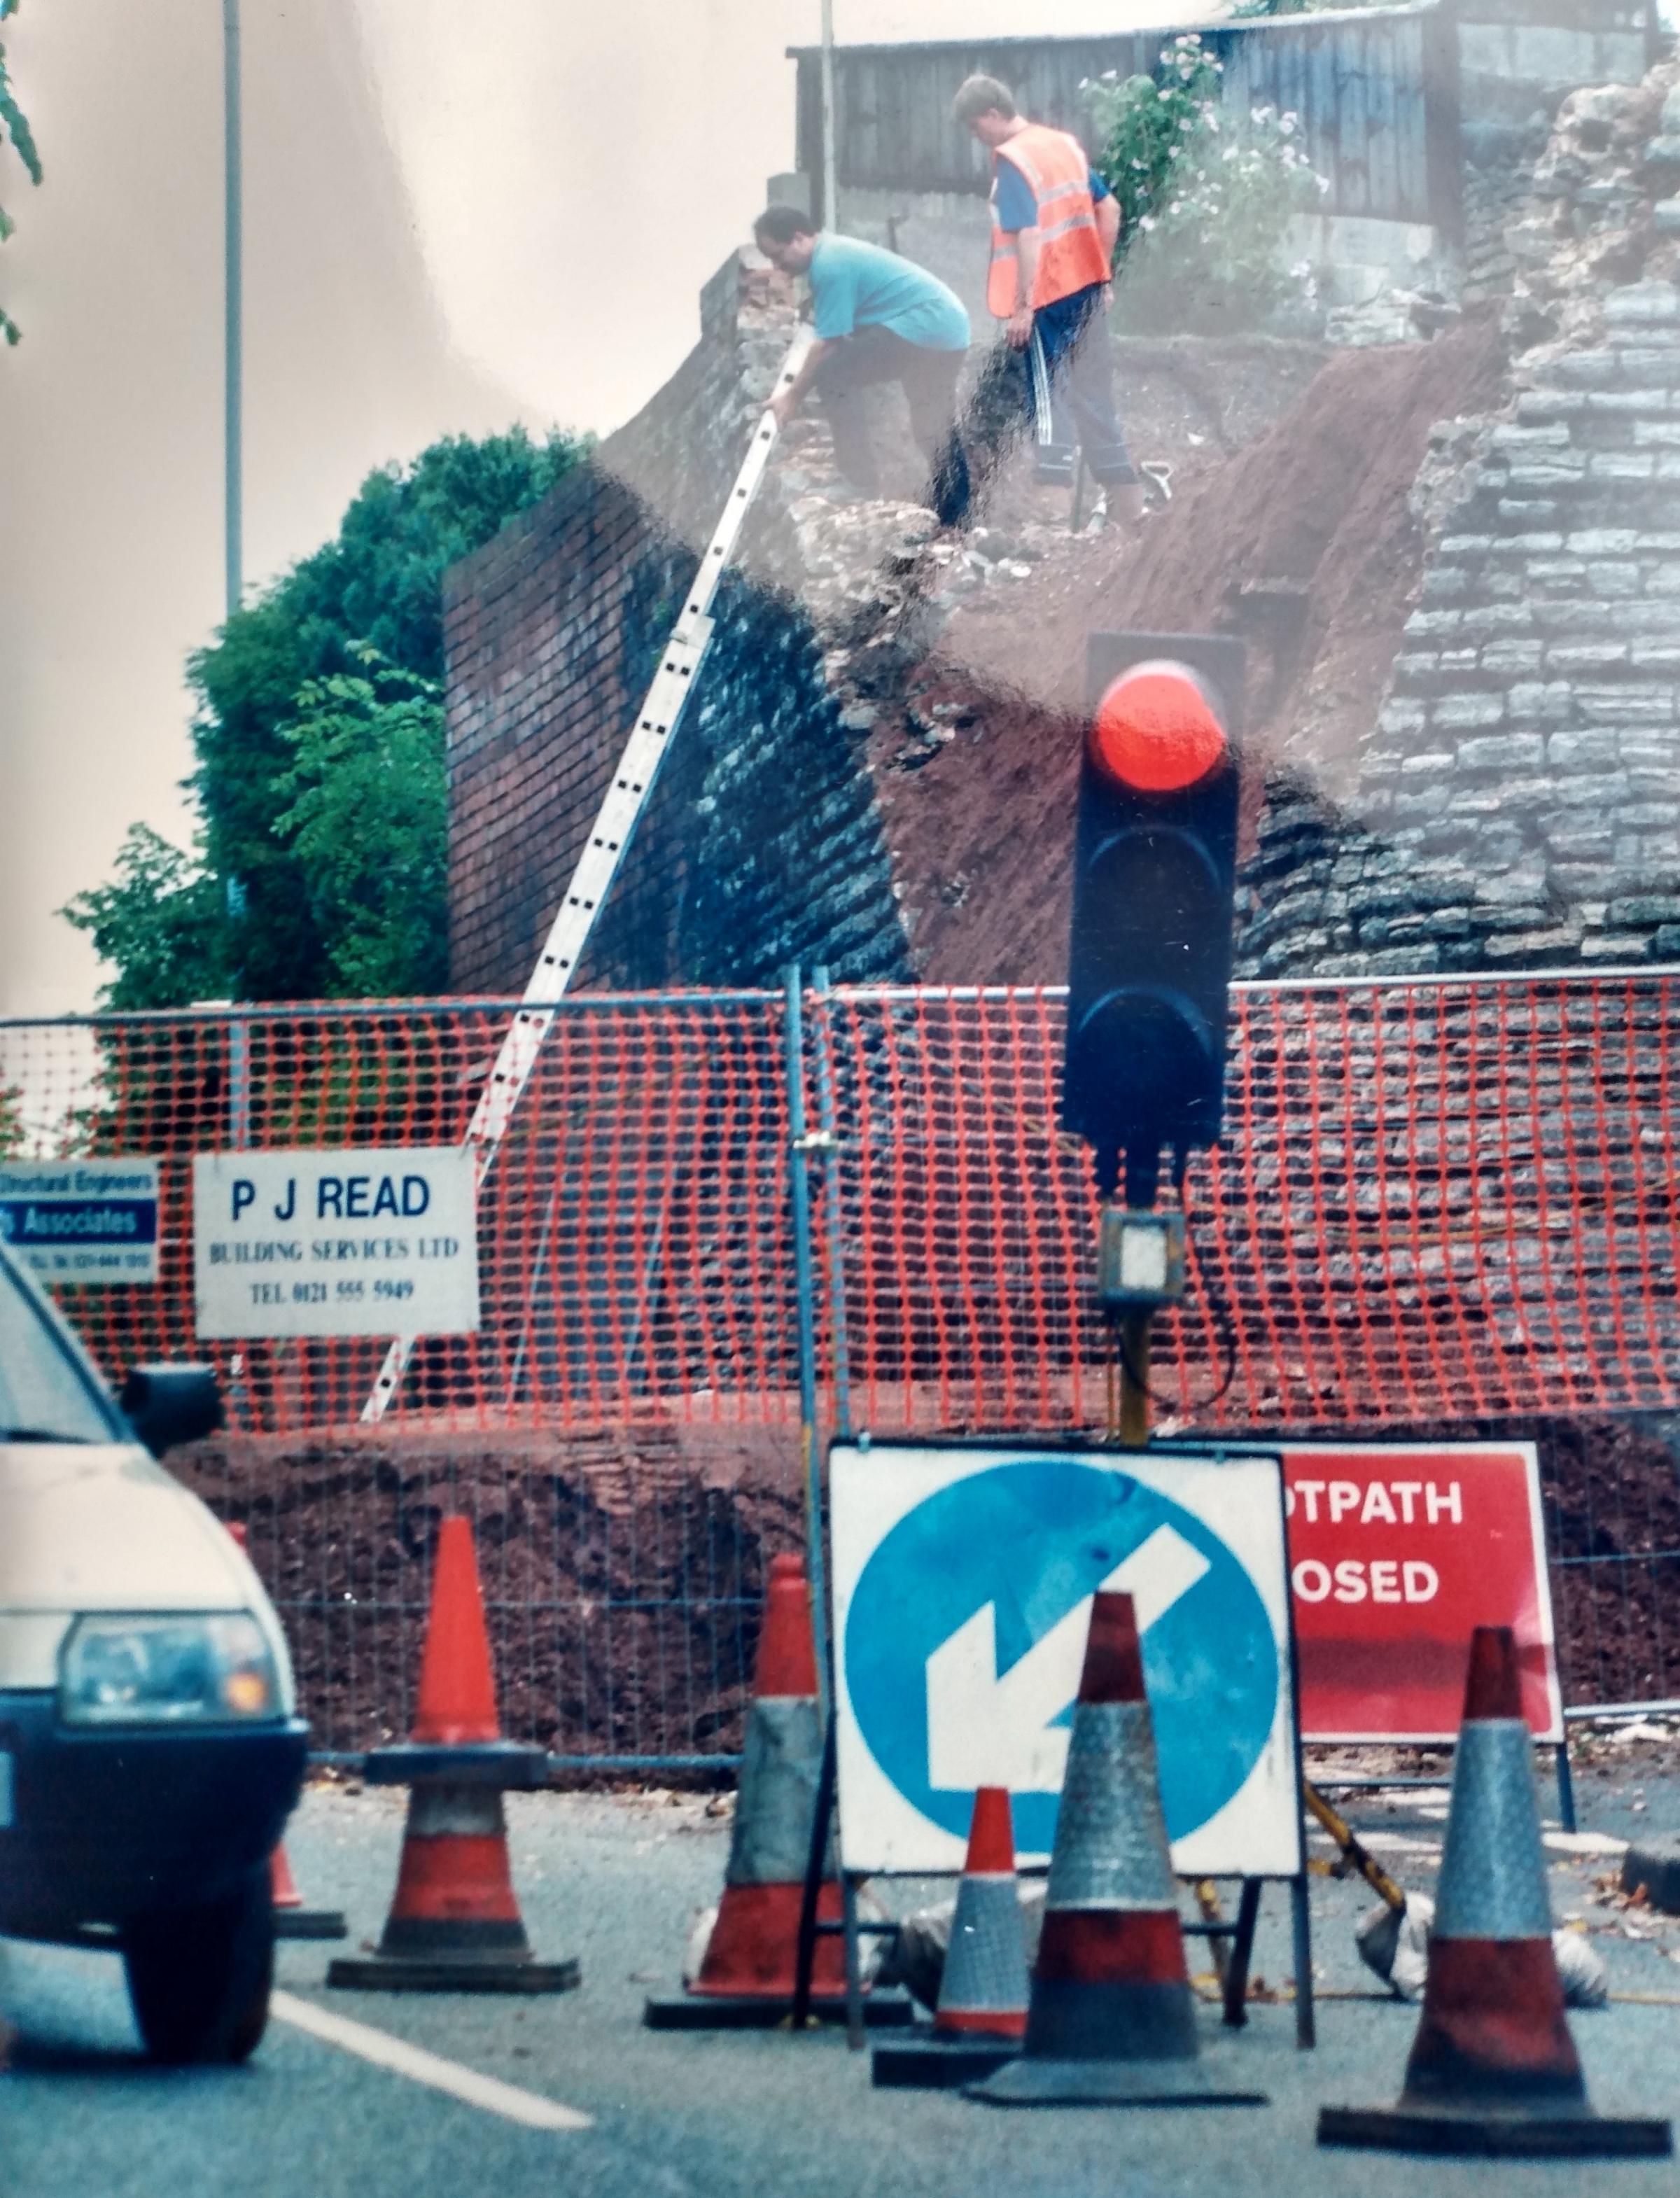 June 1998 and work it still ongoing to repair the wall seriously damaged two months earlier